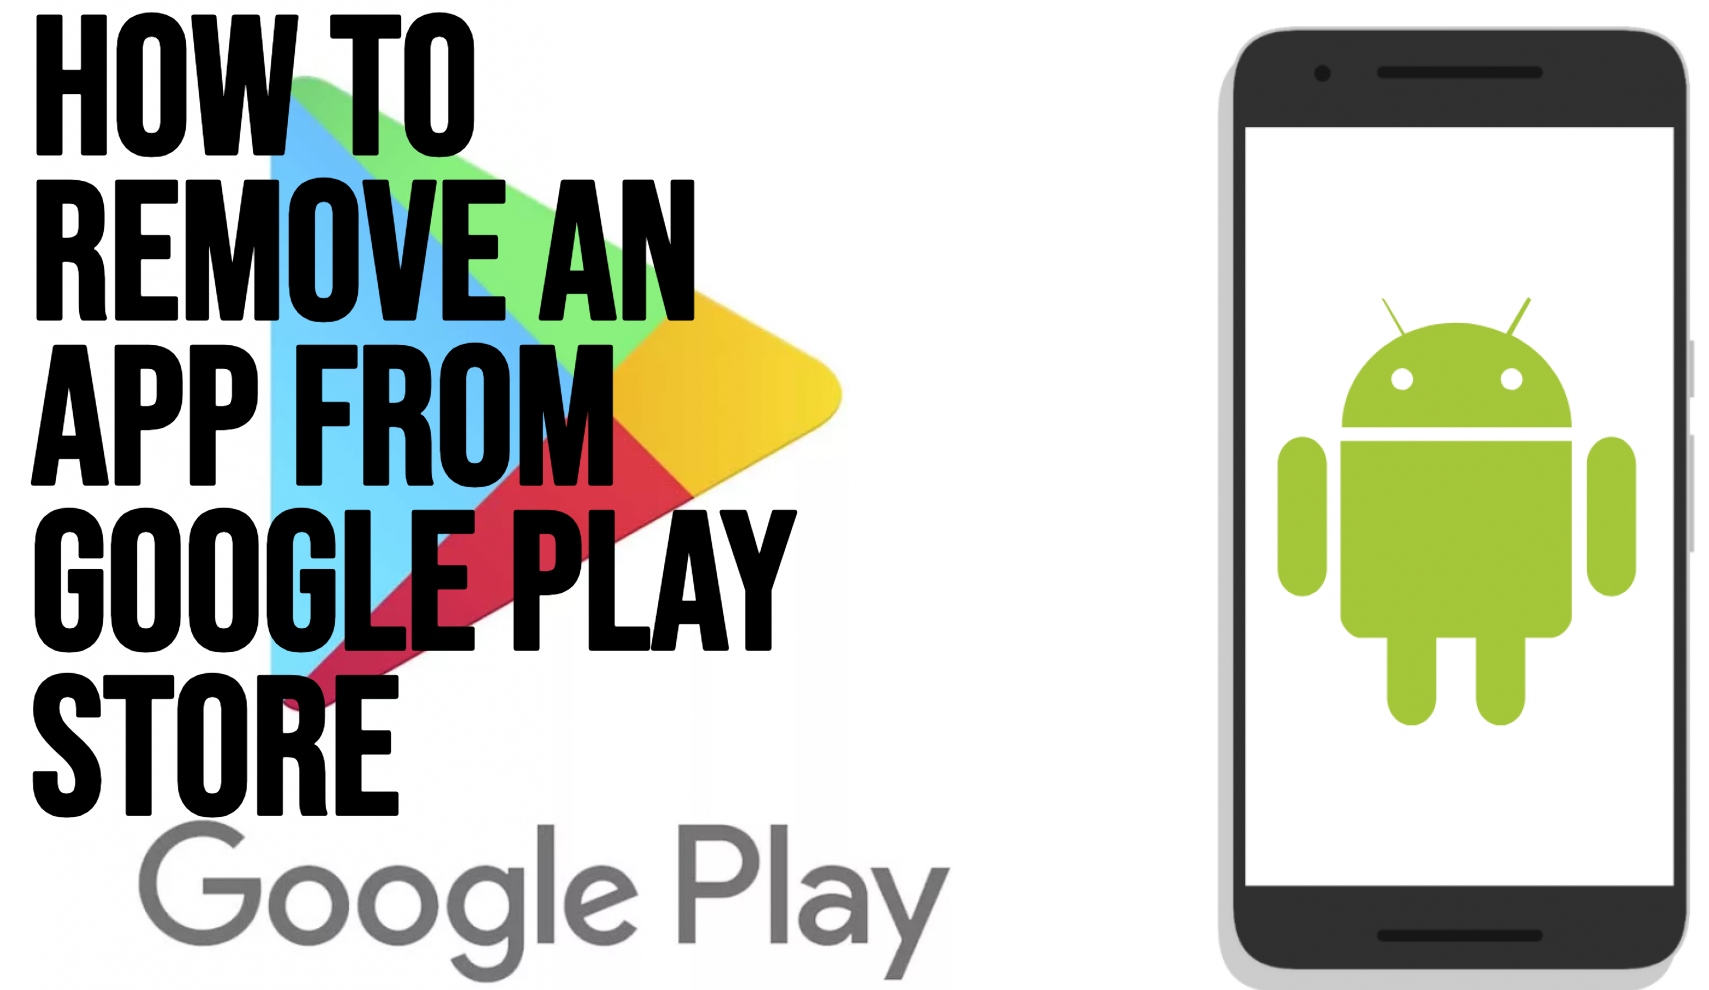 How to Remove an App from Google Play Store